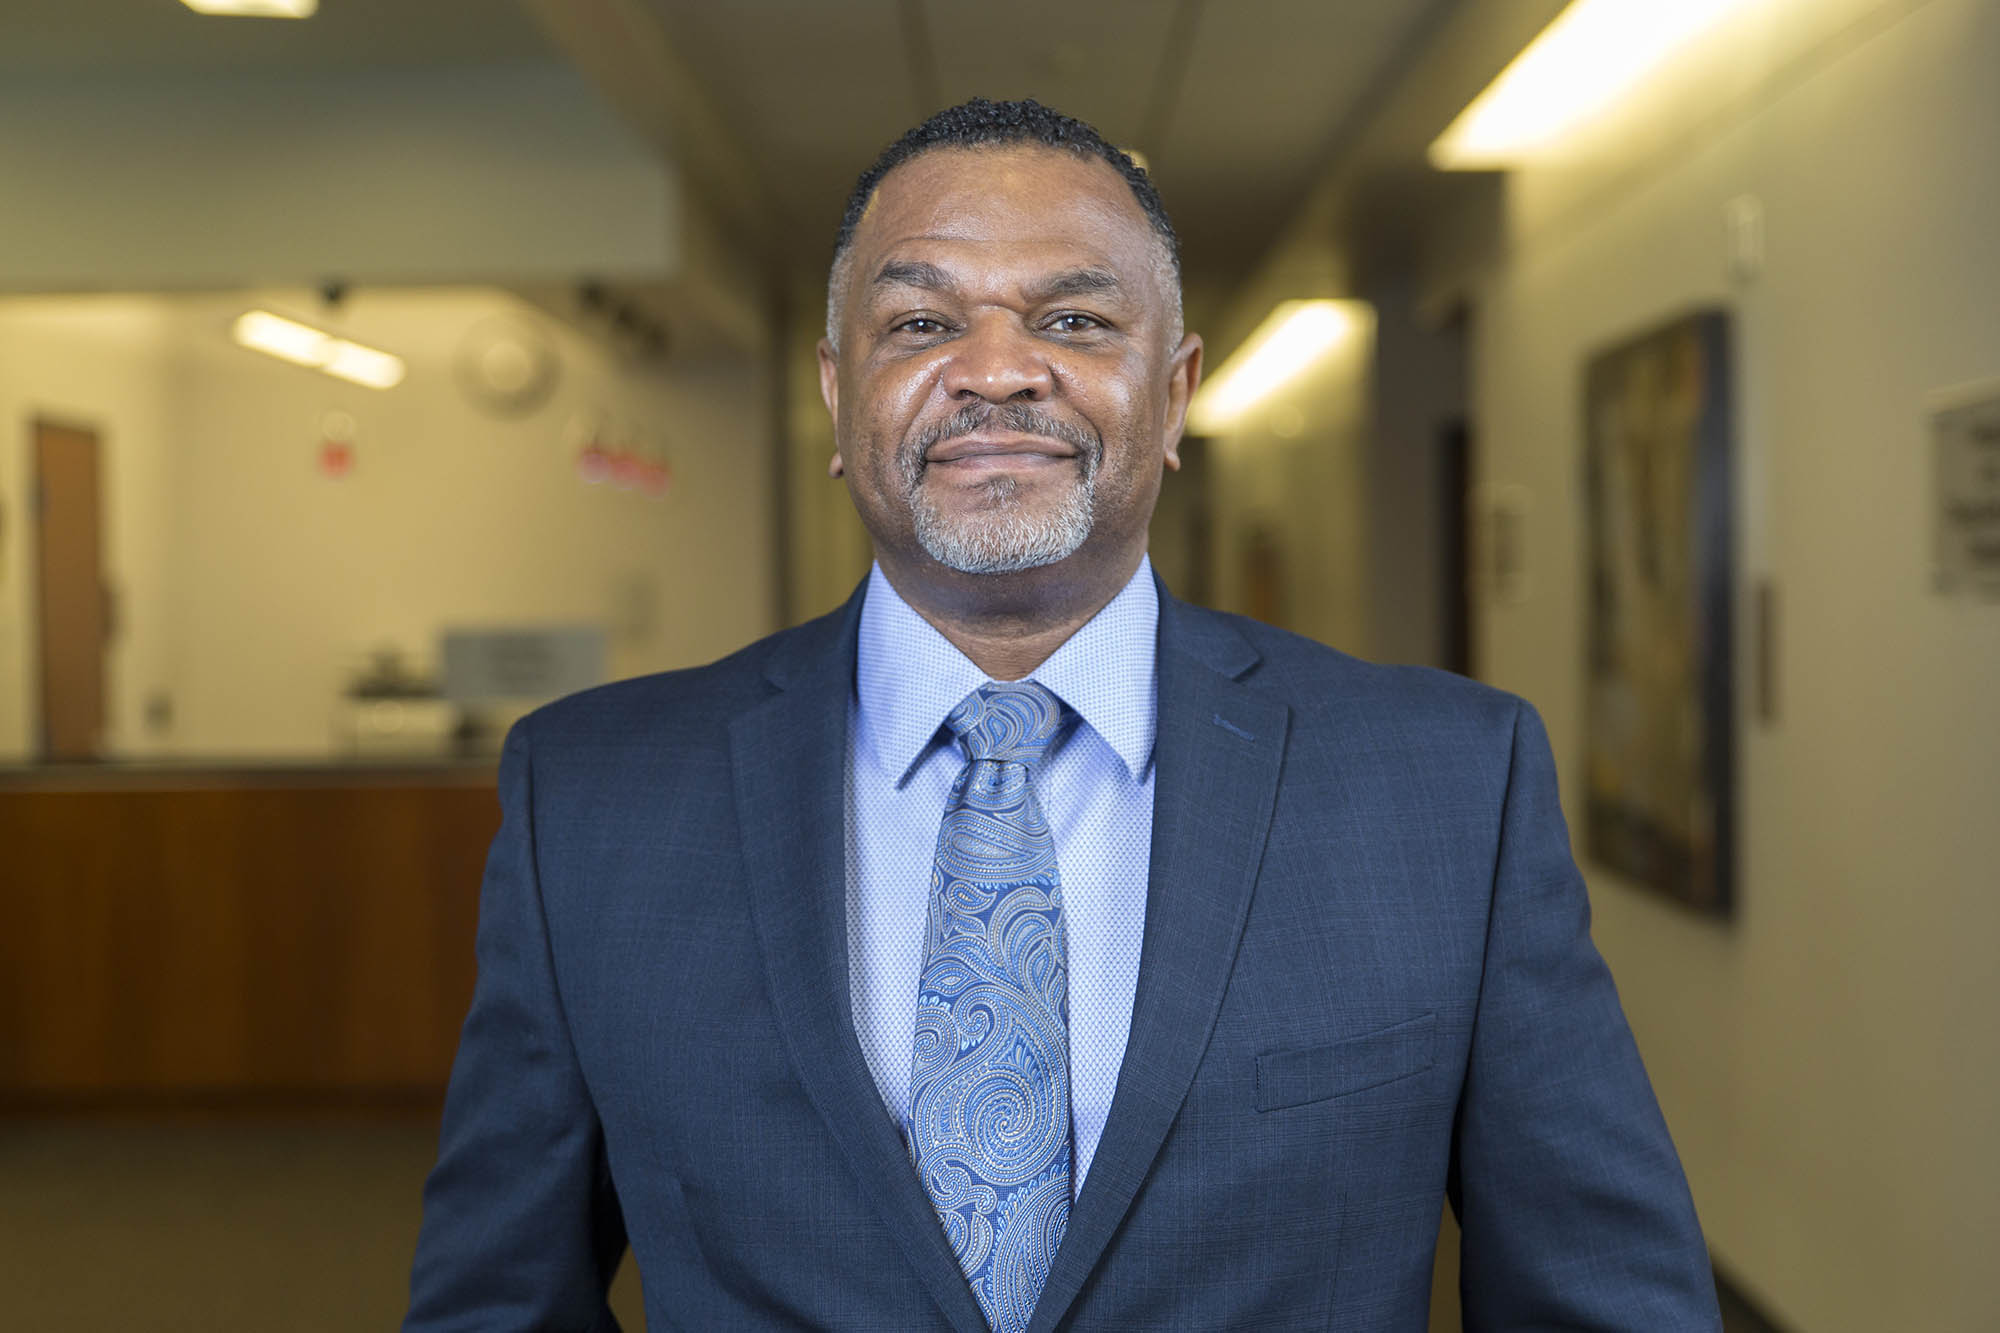 Dean Martell Teasley smiles at the camera, standing in the hallway of the Goodwill Humanitarian Building